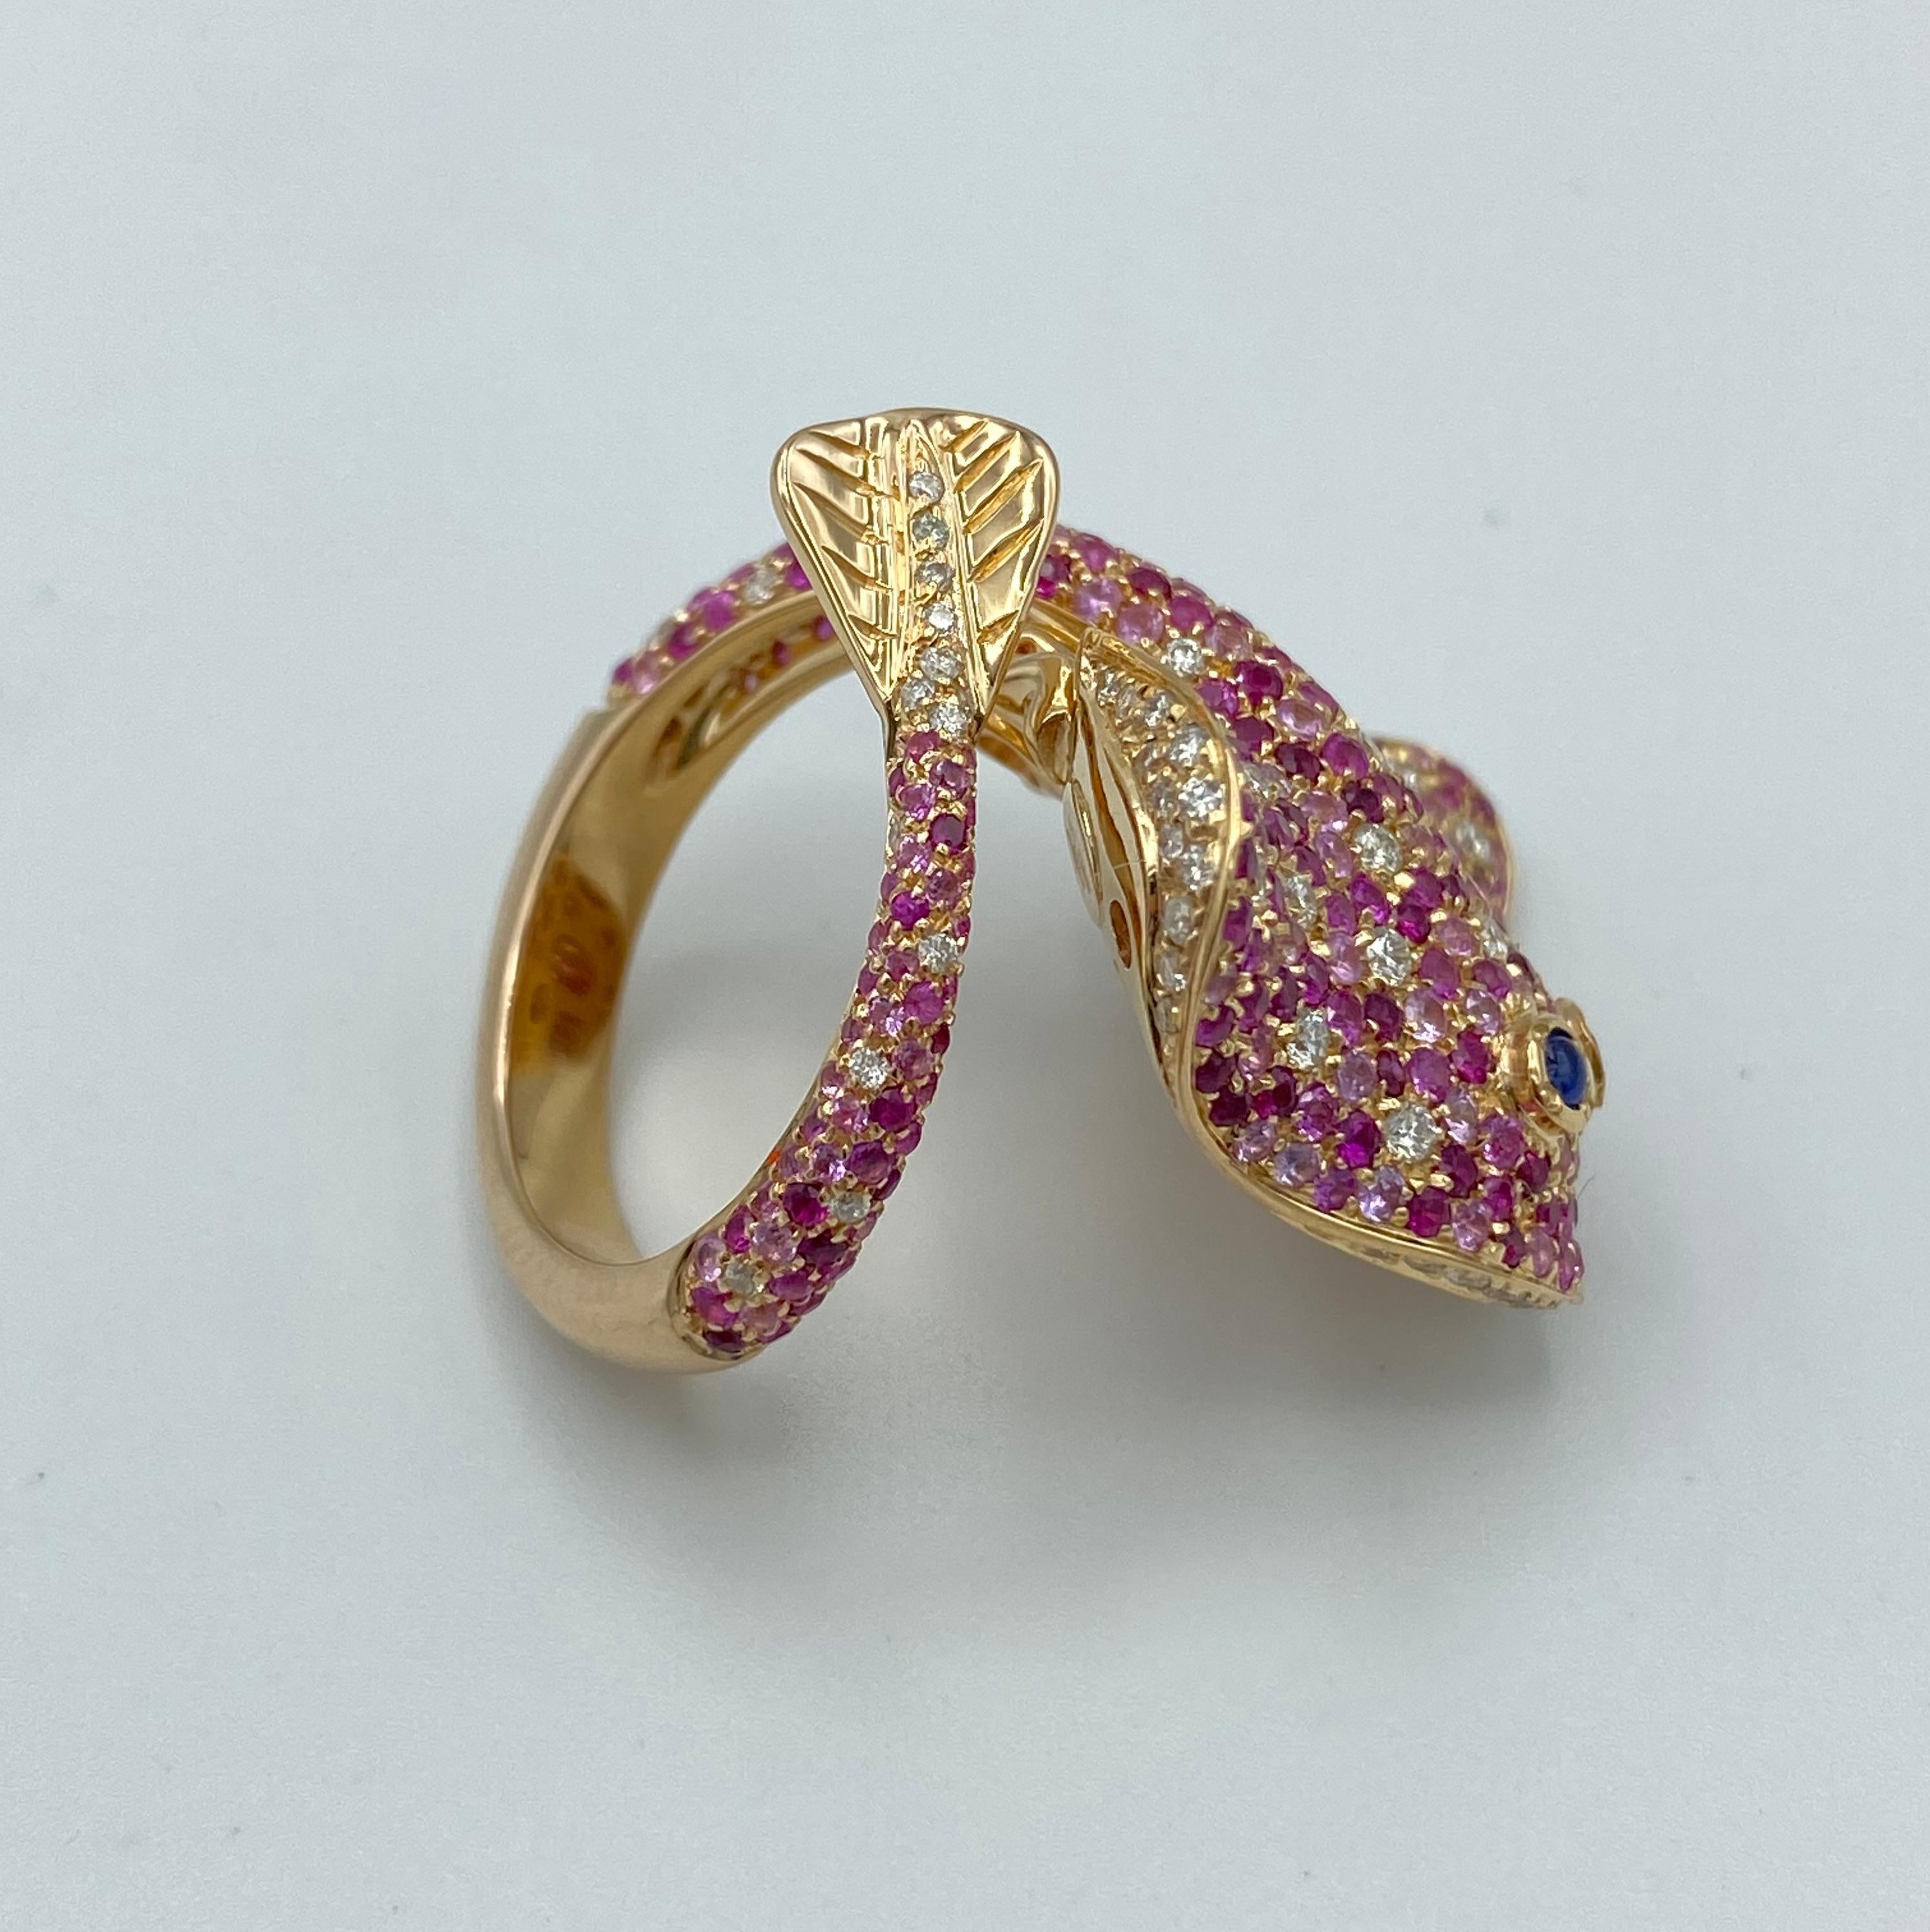 Ray Fish White Diamond Pink and Blue Sapphire Ruby 18 Kt Gold Ring Made in Italy 3